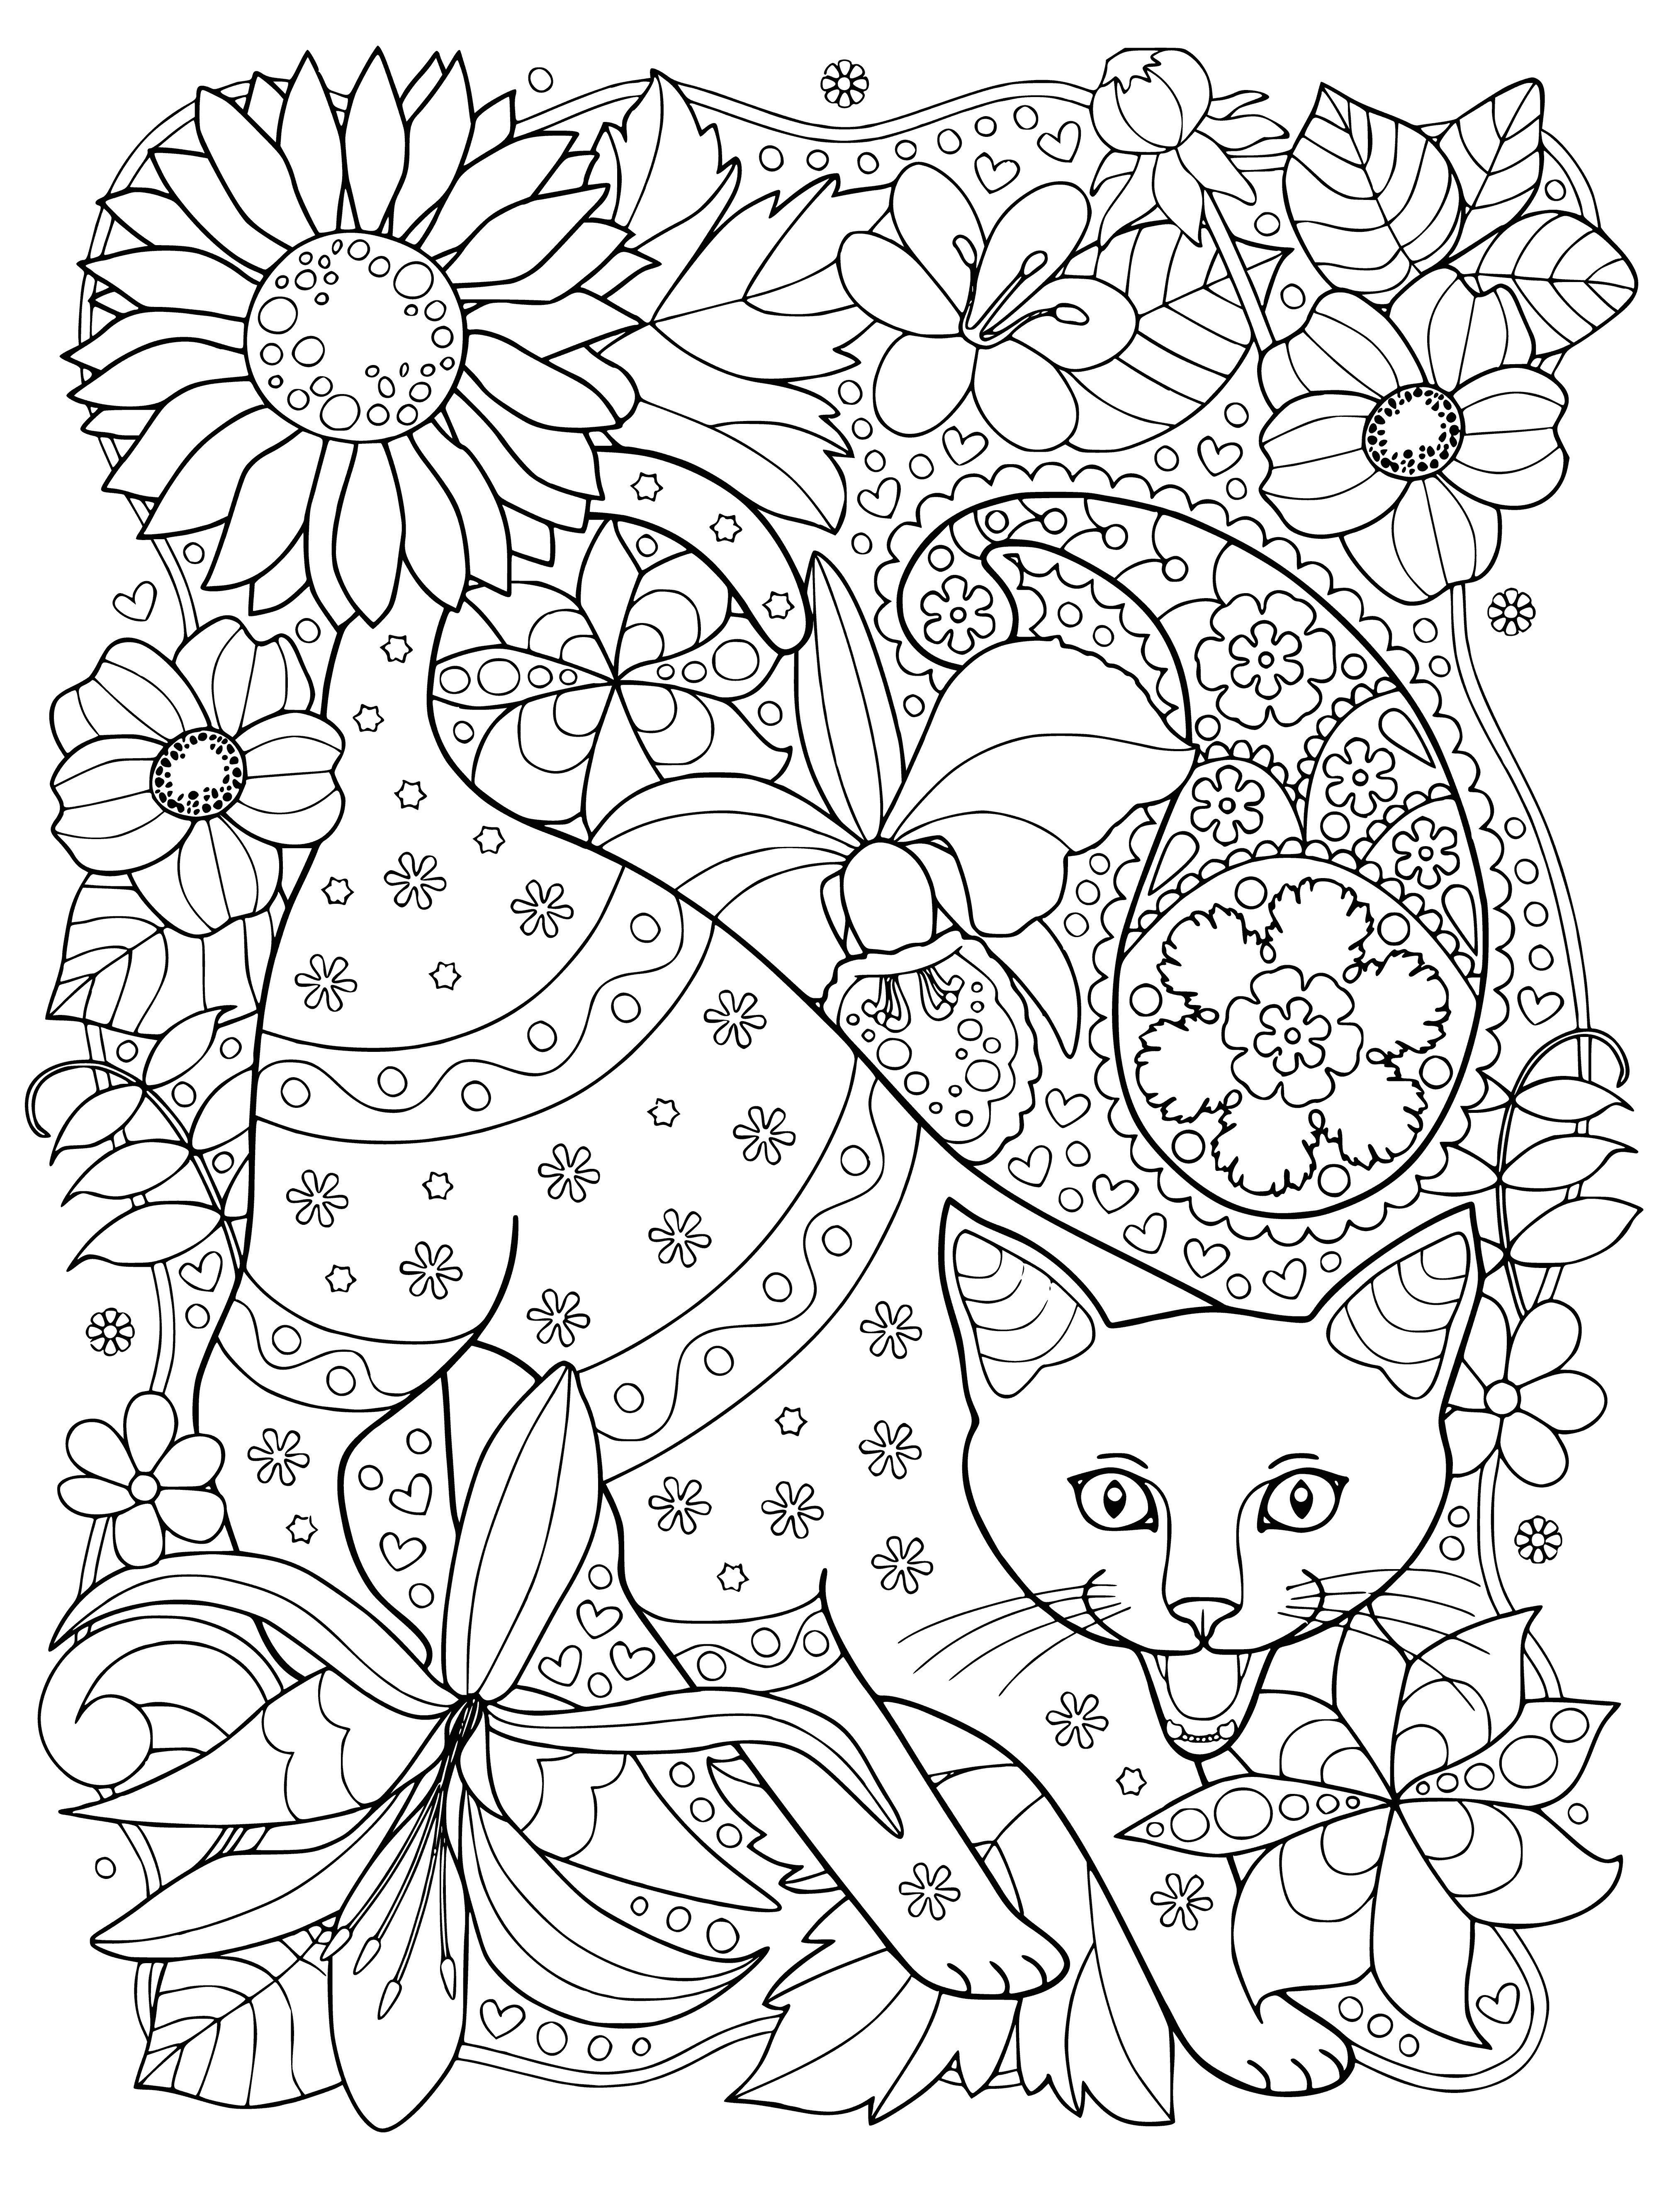 coloring page: .

Two cats, one brown and one orange, lounging and enjoying the sunshine.